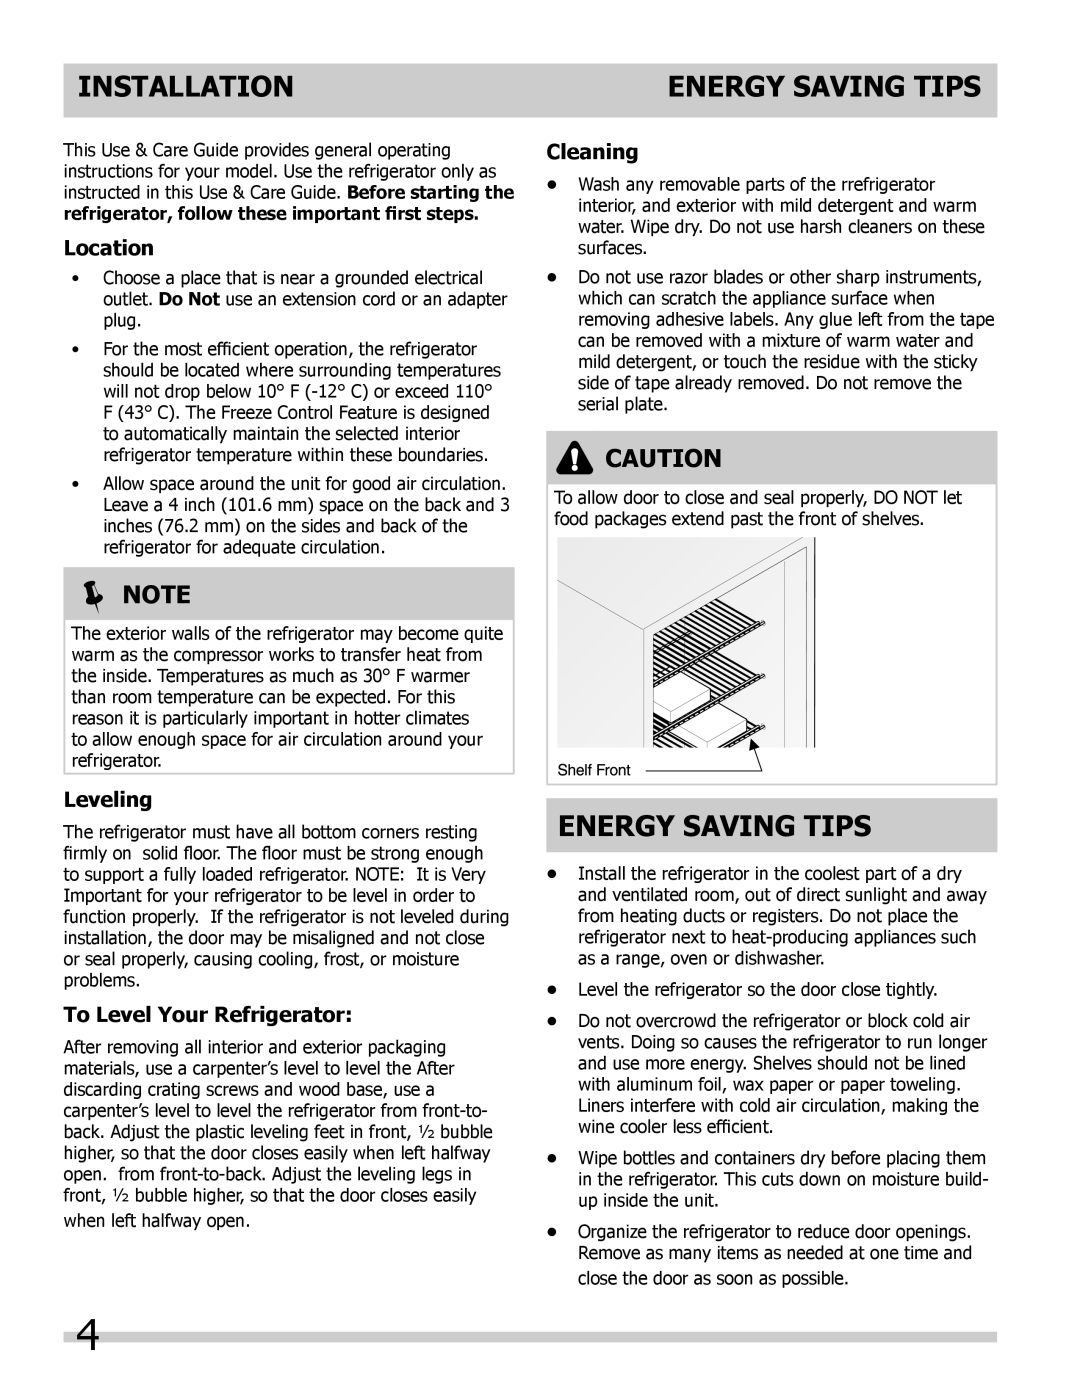 Frigidaire 241607805 Installation, Energy Saving Tips,  Note, Location, Leveling, To Level Your Refrigerator, Cleaning 